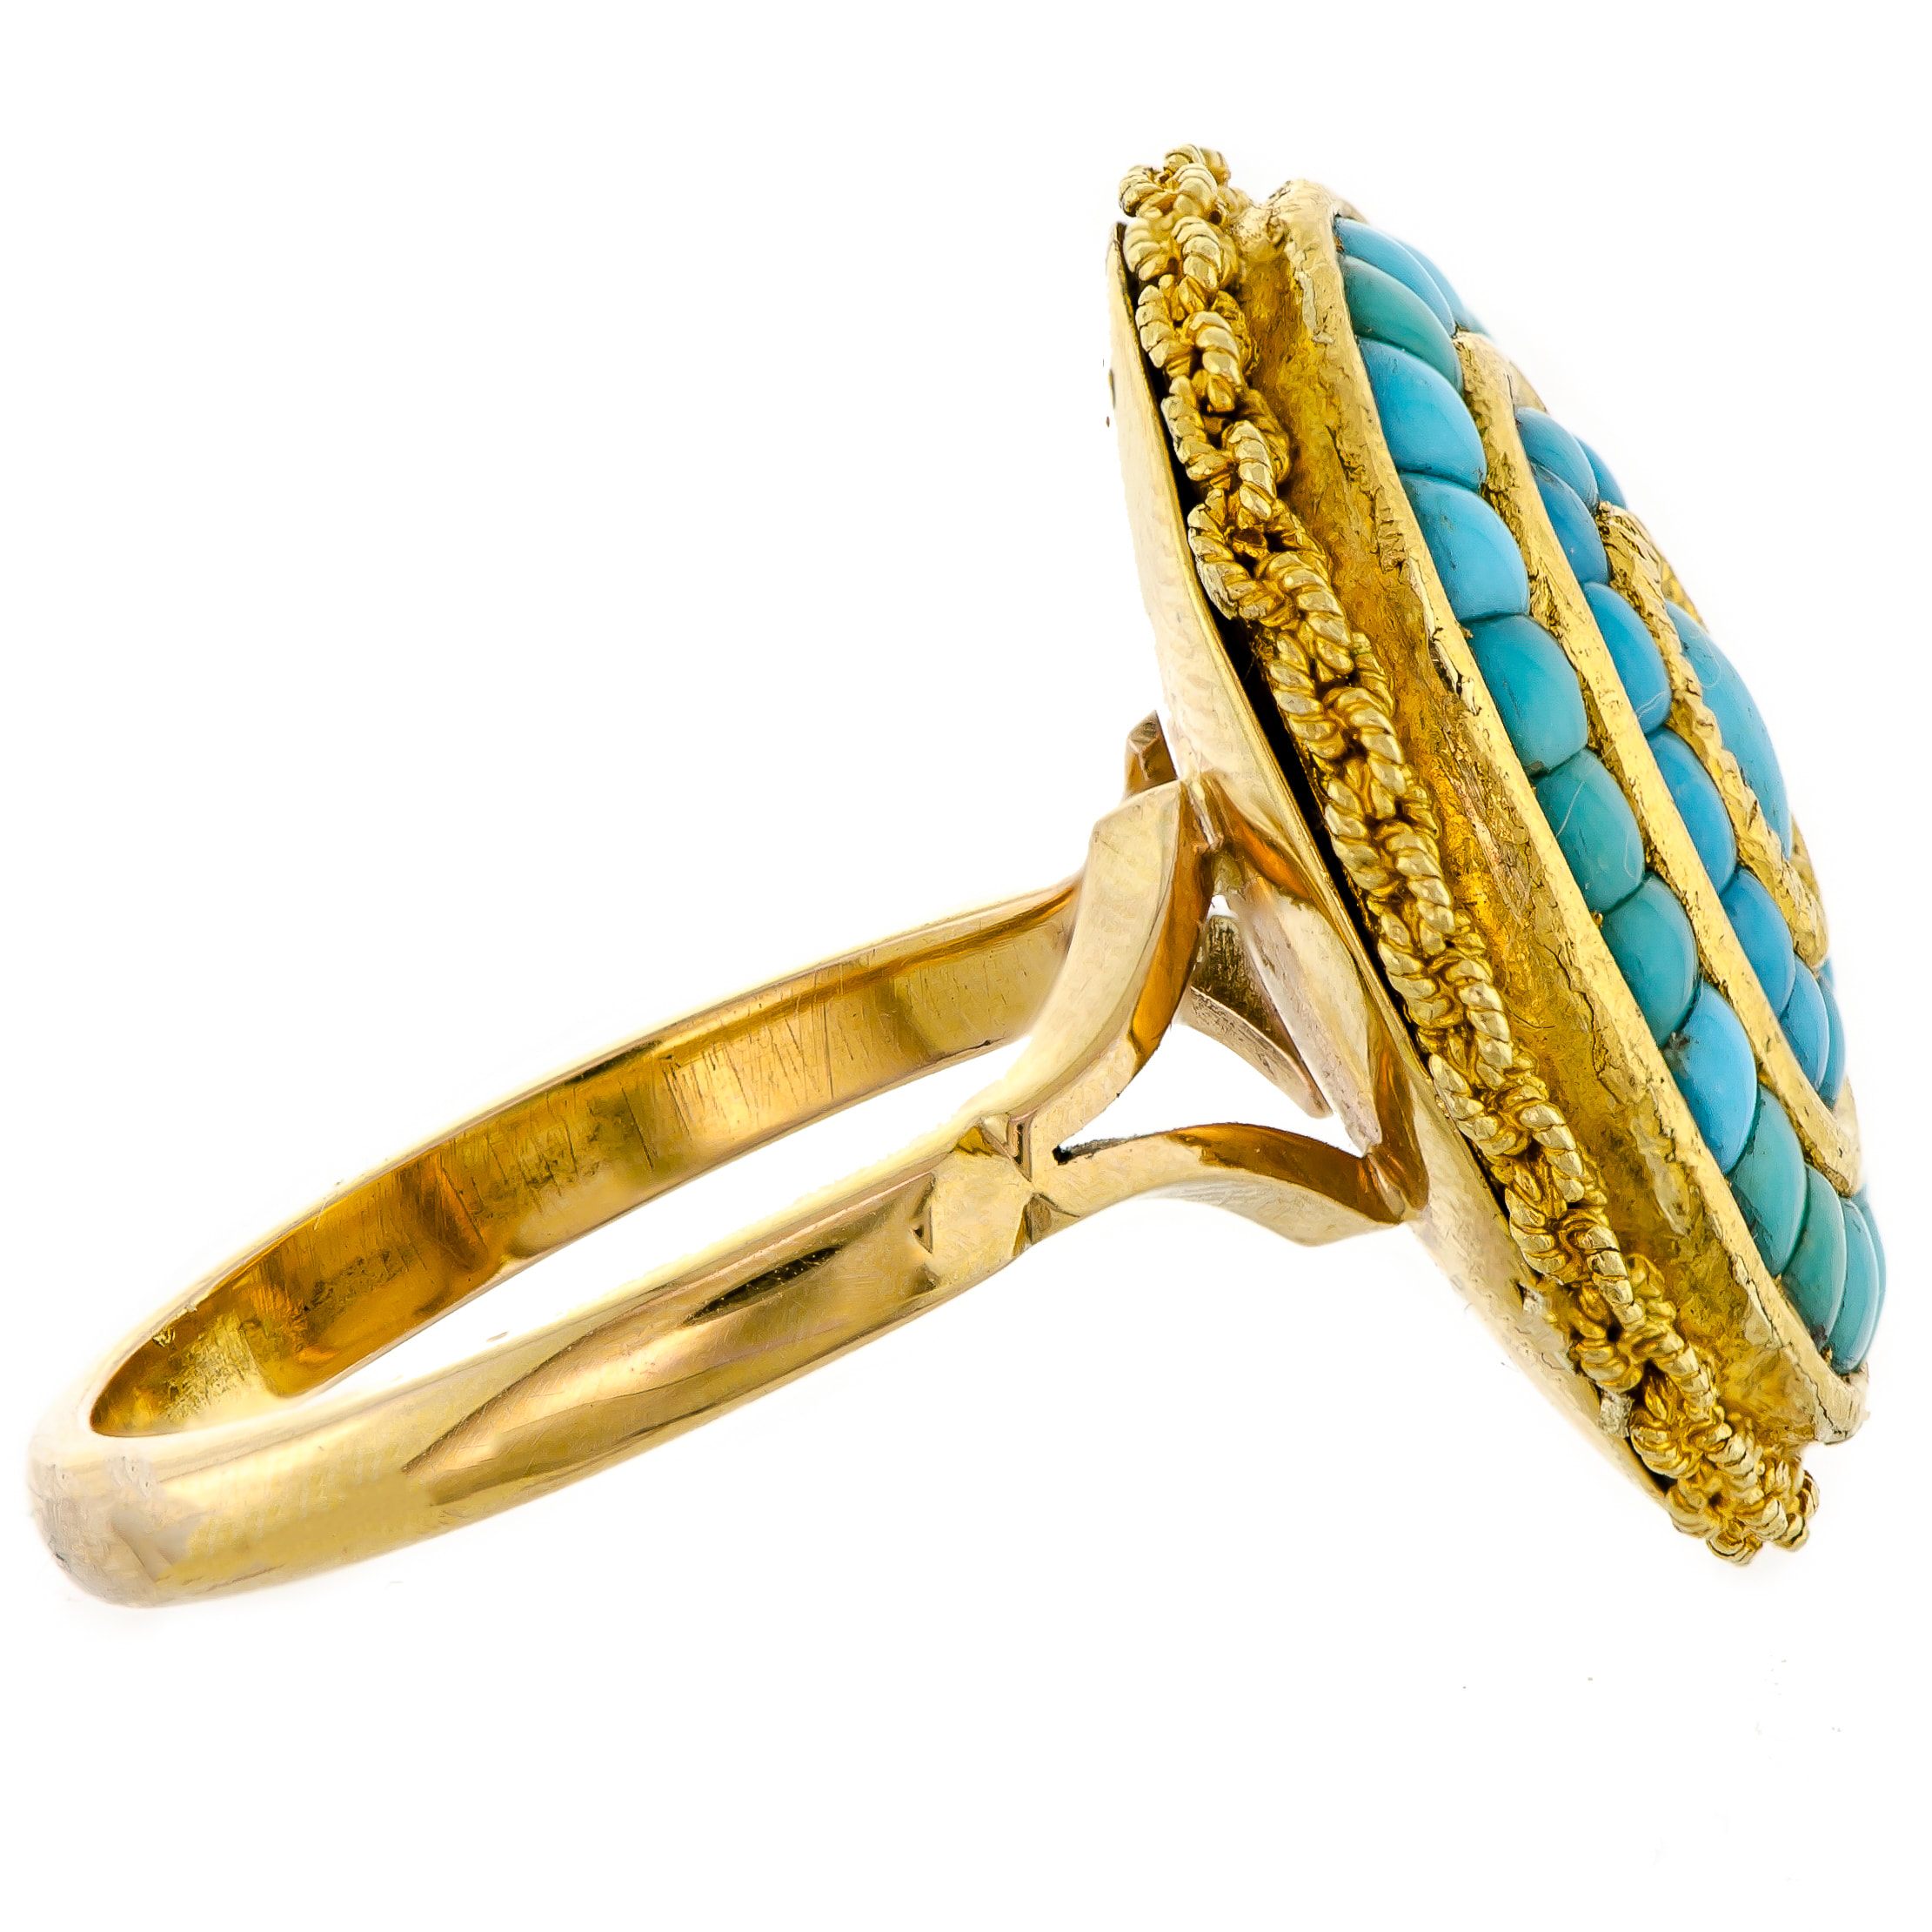 Details about   14k Solid Gold Ring turquoise diamond ring wedding ring art deco ring DJR0353